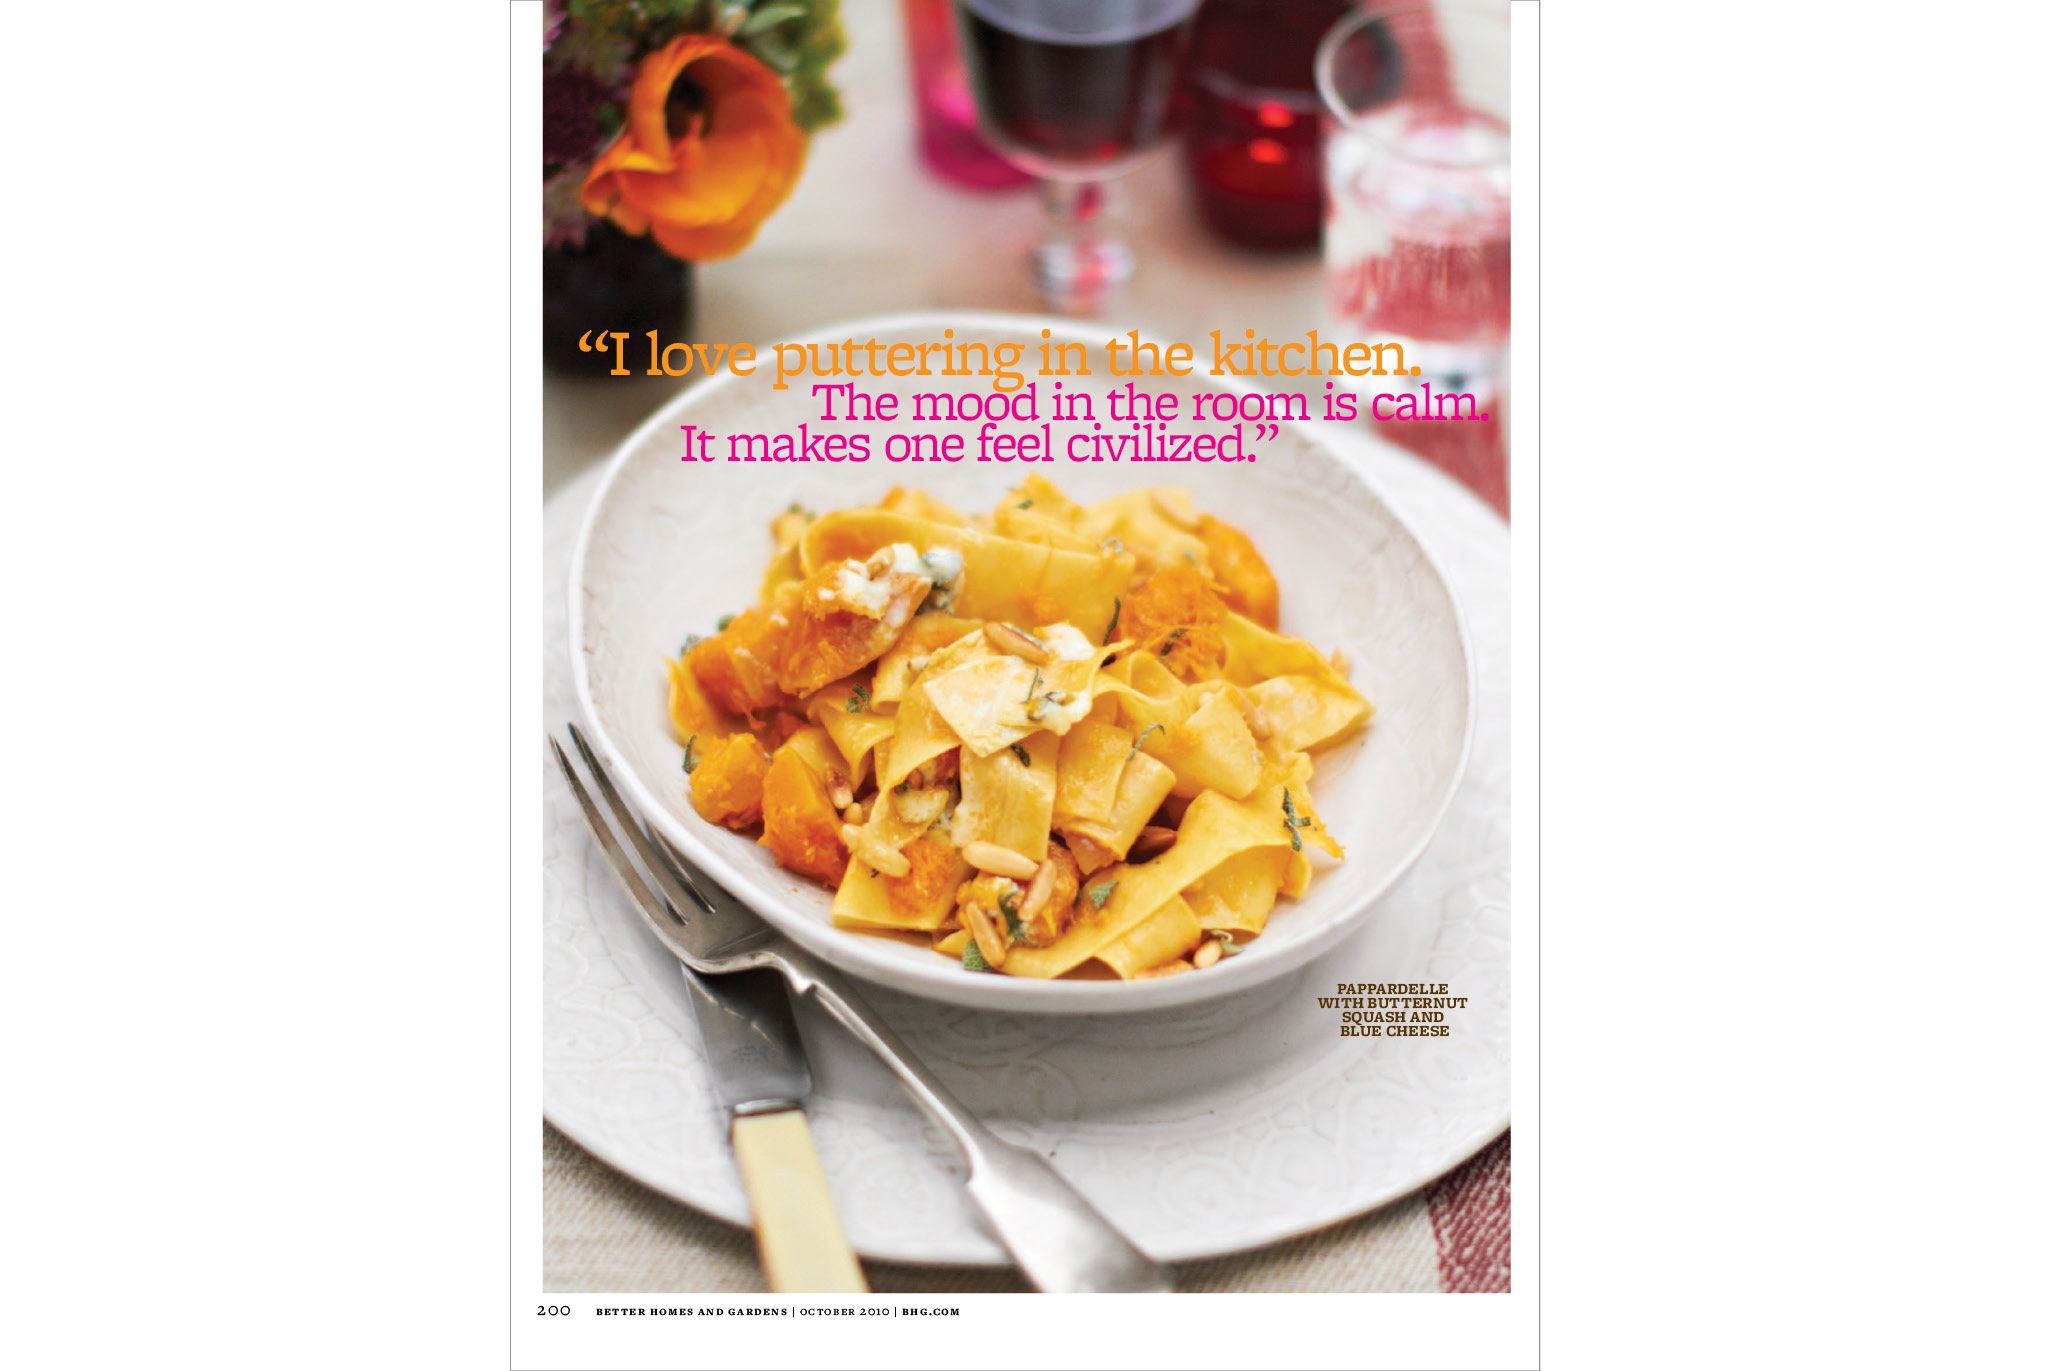 <strong>Dinner with Nigella, Better Homes & Gardens Magazine</strong><br />Words: Lisa Kingsly | Photos David Loftus | Food Styling: Hettie Potter | Prop Styling: Rose Murray